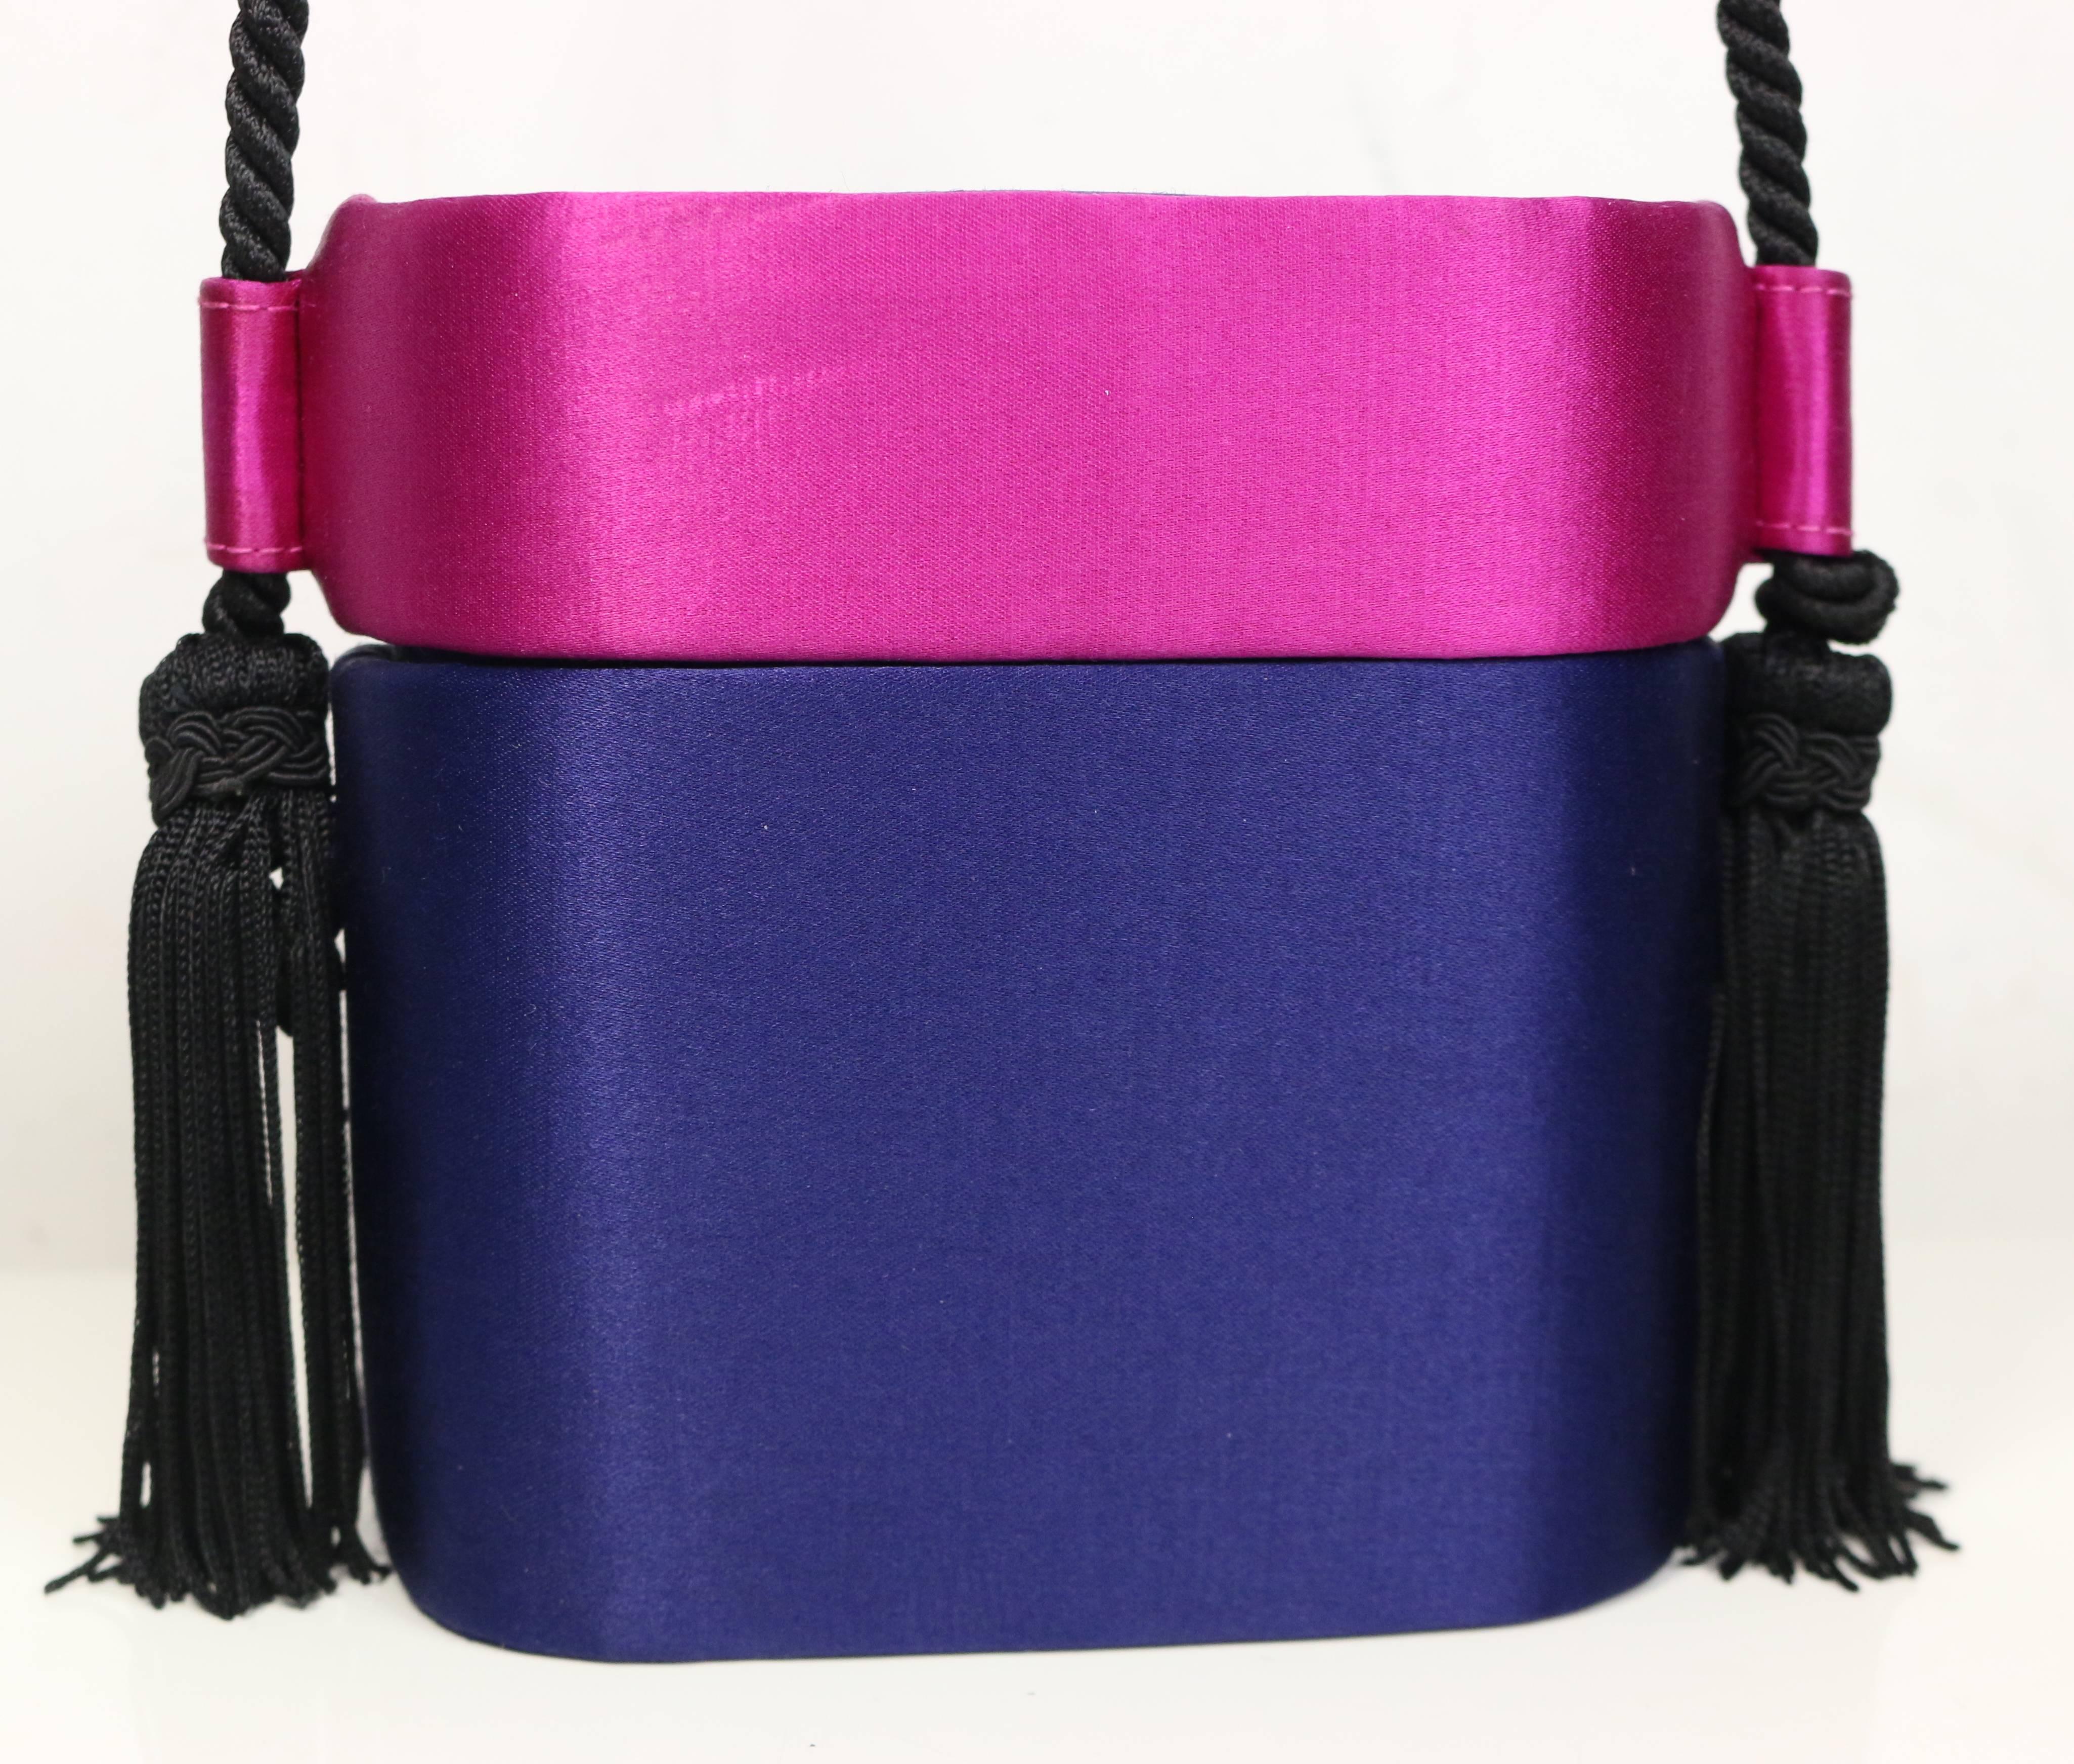 - Vintage 80s Escada blue and pink silk box clutches shoulder bag. Rare and one of a kind!!!

- Black tassel shoulder rope strap. 

- Pink silk top closure. 

- Interior open pocket. 

- Length: 5 inches. Height: 5 inches. Width: 2.5 inches.